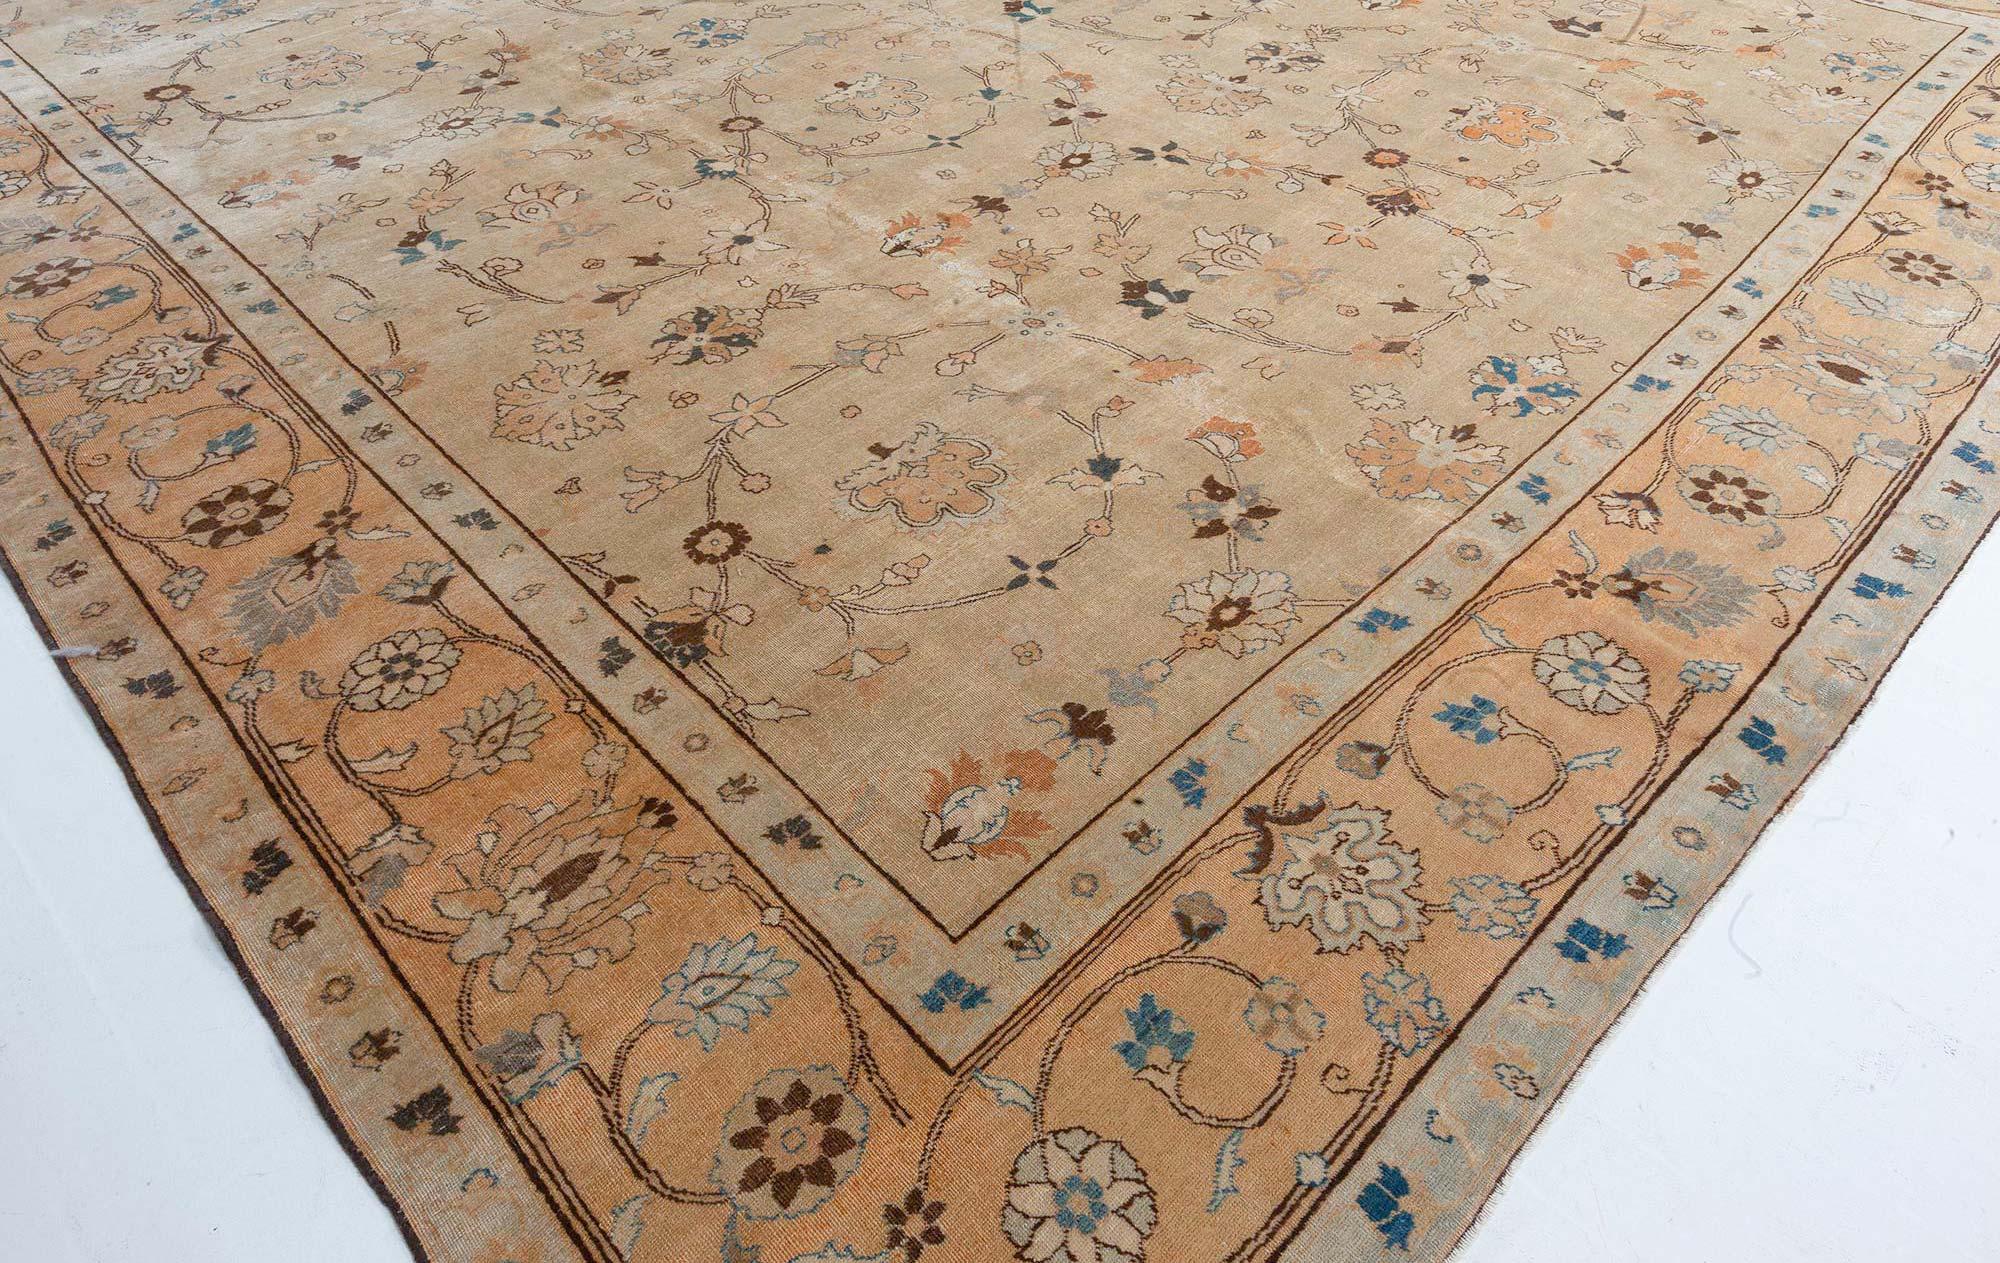 Hand-Woven Authentic Persian Tabriz Handmade Wool Carpet For Sale